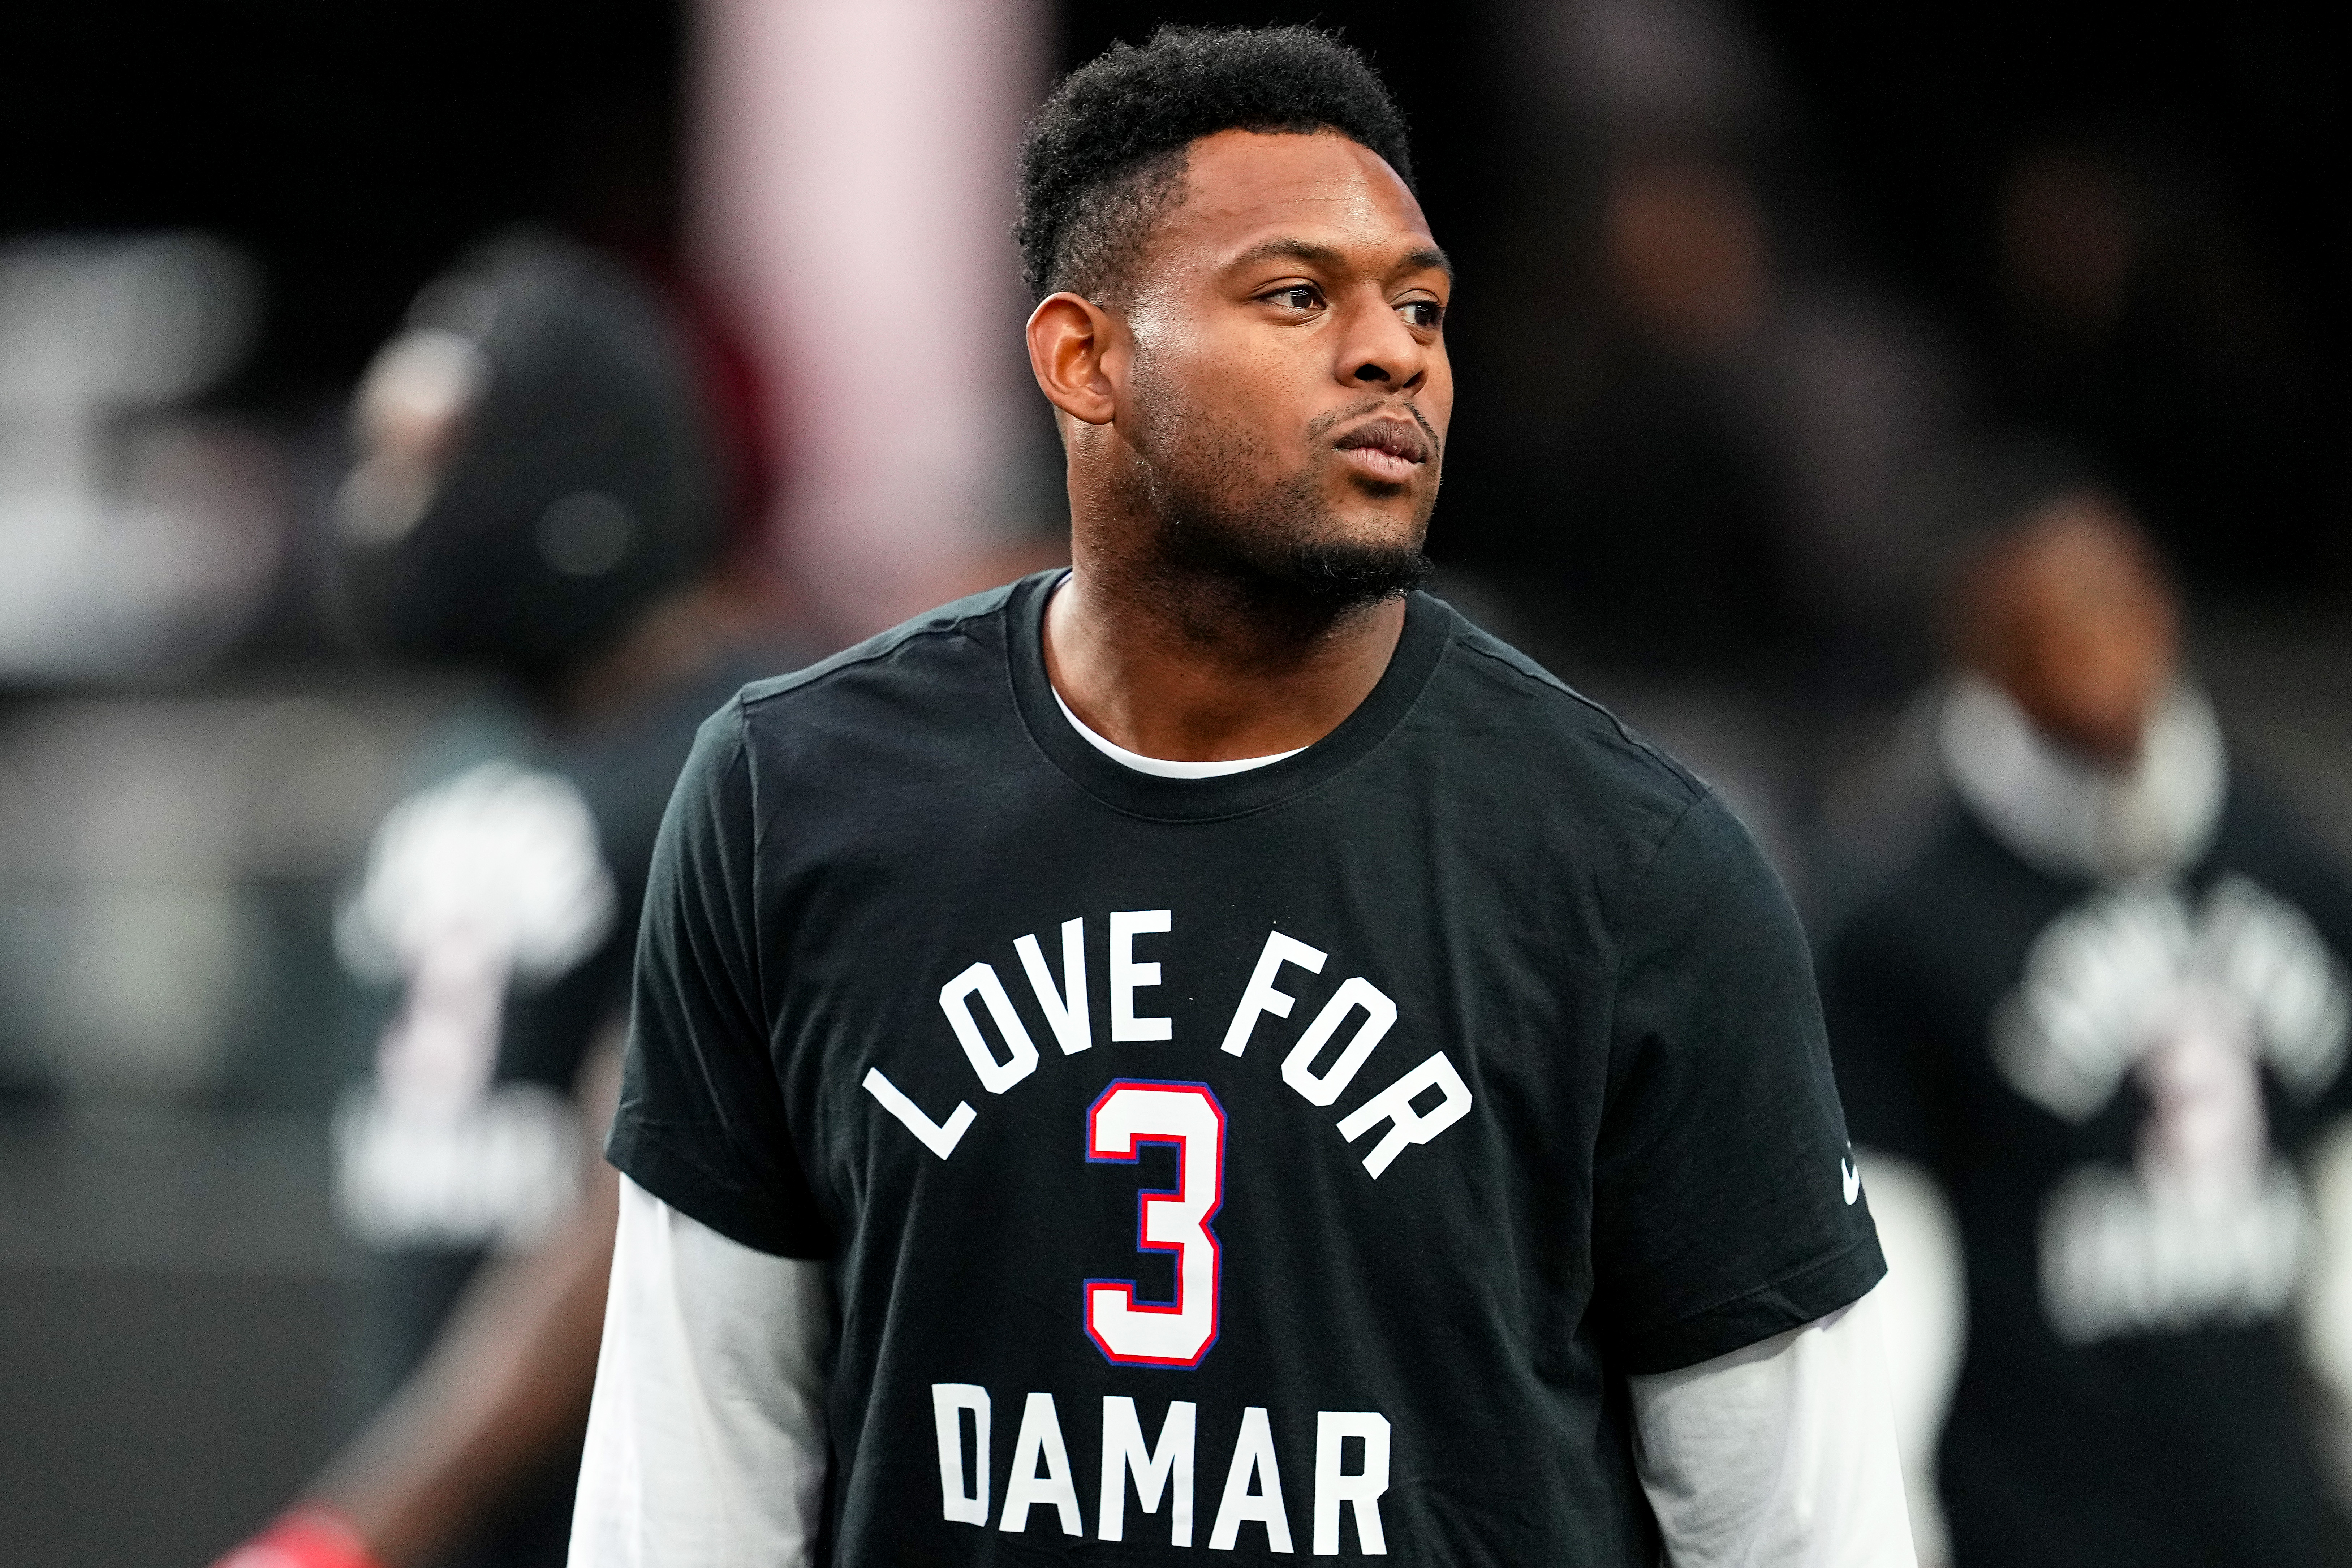 JuJu Smith-Schuster of the Kansas City Chiefs wears a shirt in honor of Damar Hamlin of the Buffalo Bills during warmups prior to playing the Las Vegas Raiders at Allegiant Stadium on January 7, 2023, in Las Vegas, Nevada. | Source: Getty Images